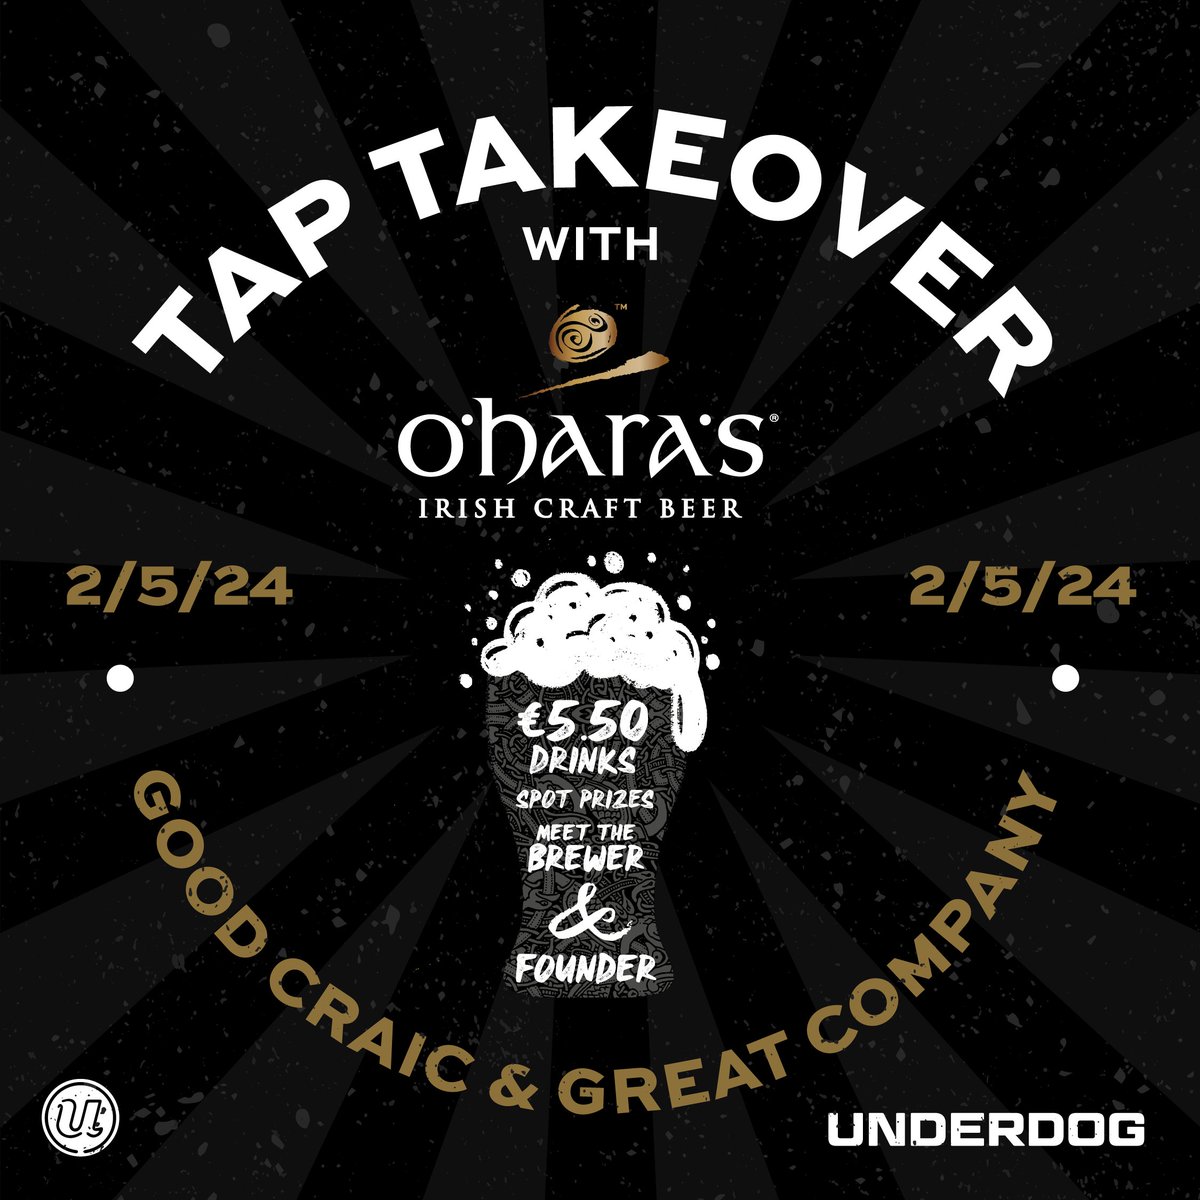 Tap Takeover alert! Mark your calendars for Thursday, May 2nd because we're taking over the taps at Underdog Pub in Dublin! Join us for an epic night featuring over 5 of our beers, including our core range, collaborations, and even our new Sub Tropical IPA. We can't wait!